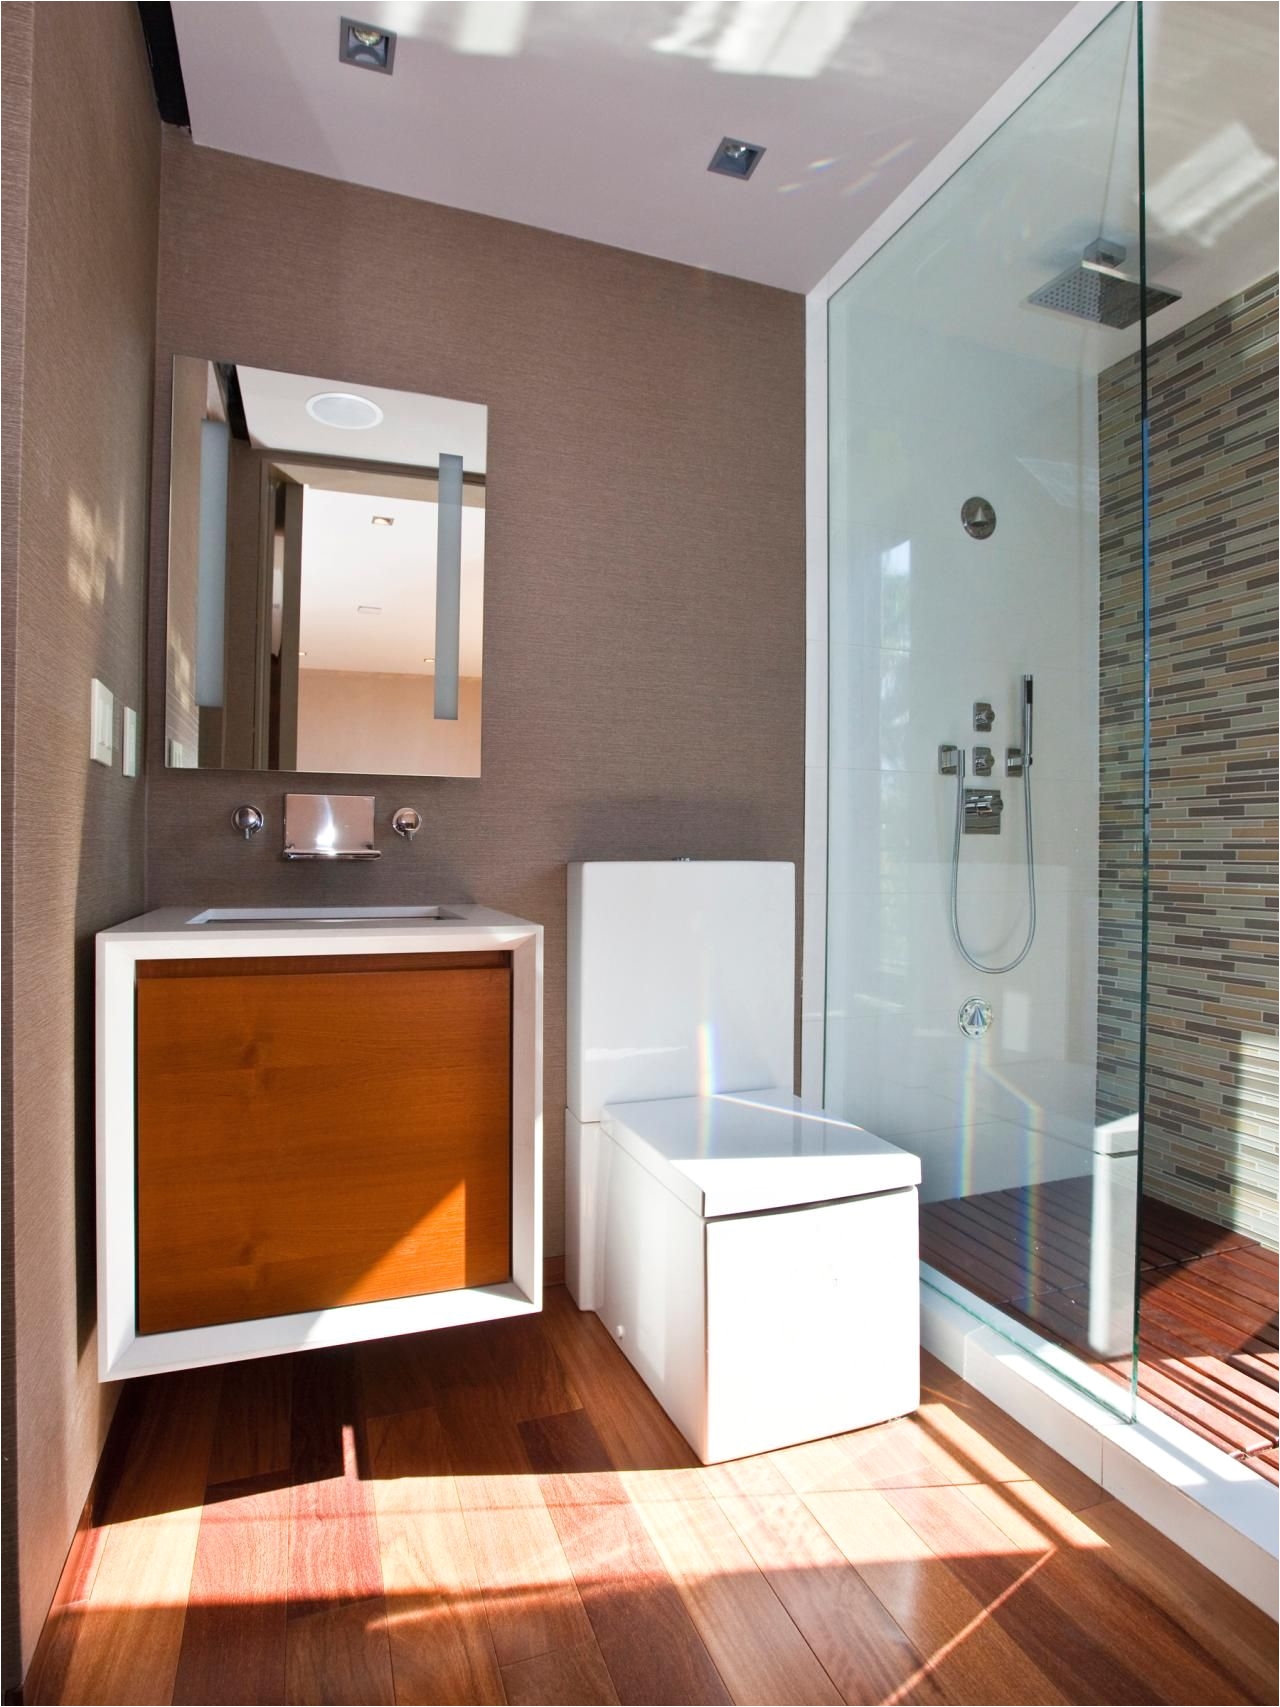 HGTV has inspirational pictures ideas and expert tips on Japanese style bathrooms to help you add a soothing and elegant bath space in your home